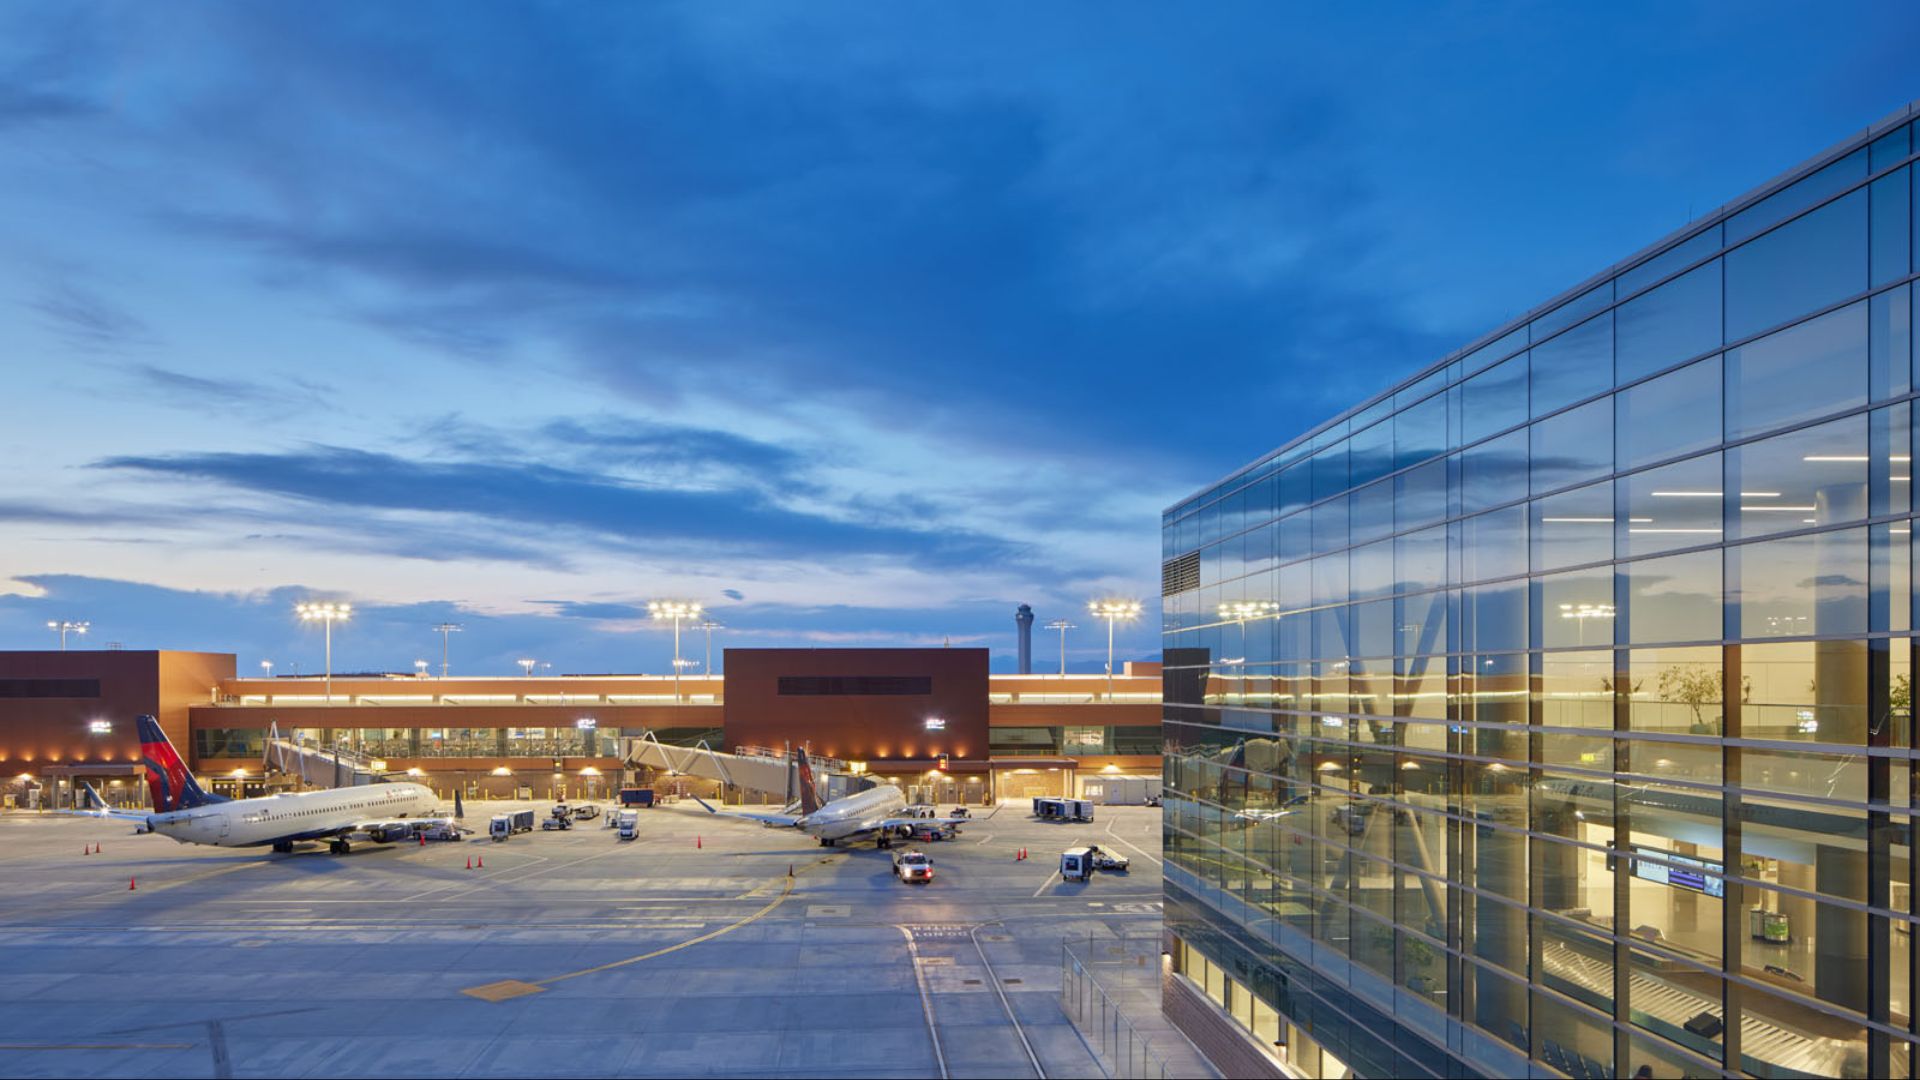 Wyoming juvenile arrested after hoax threat at Salt Lake City airport